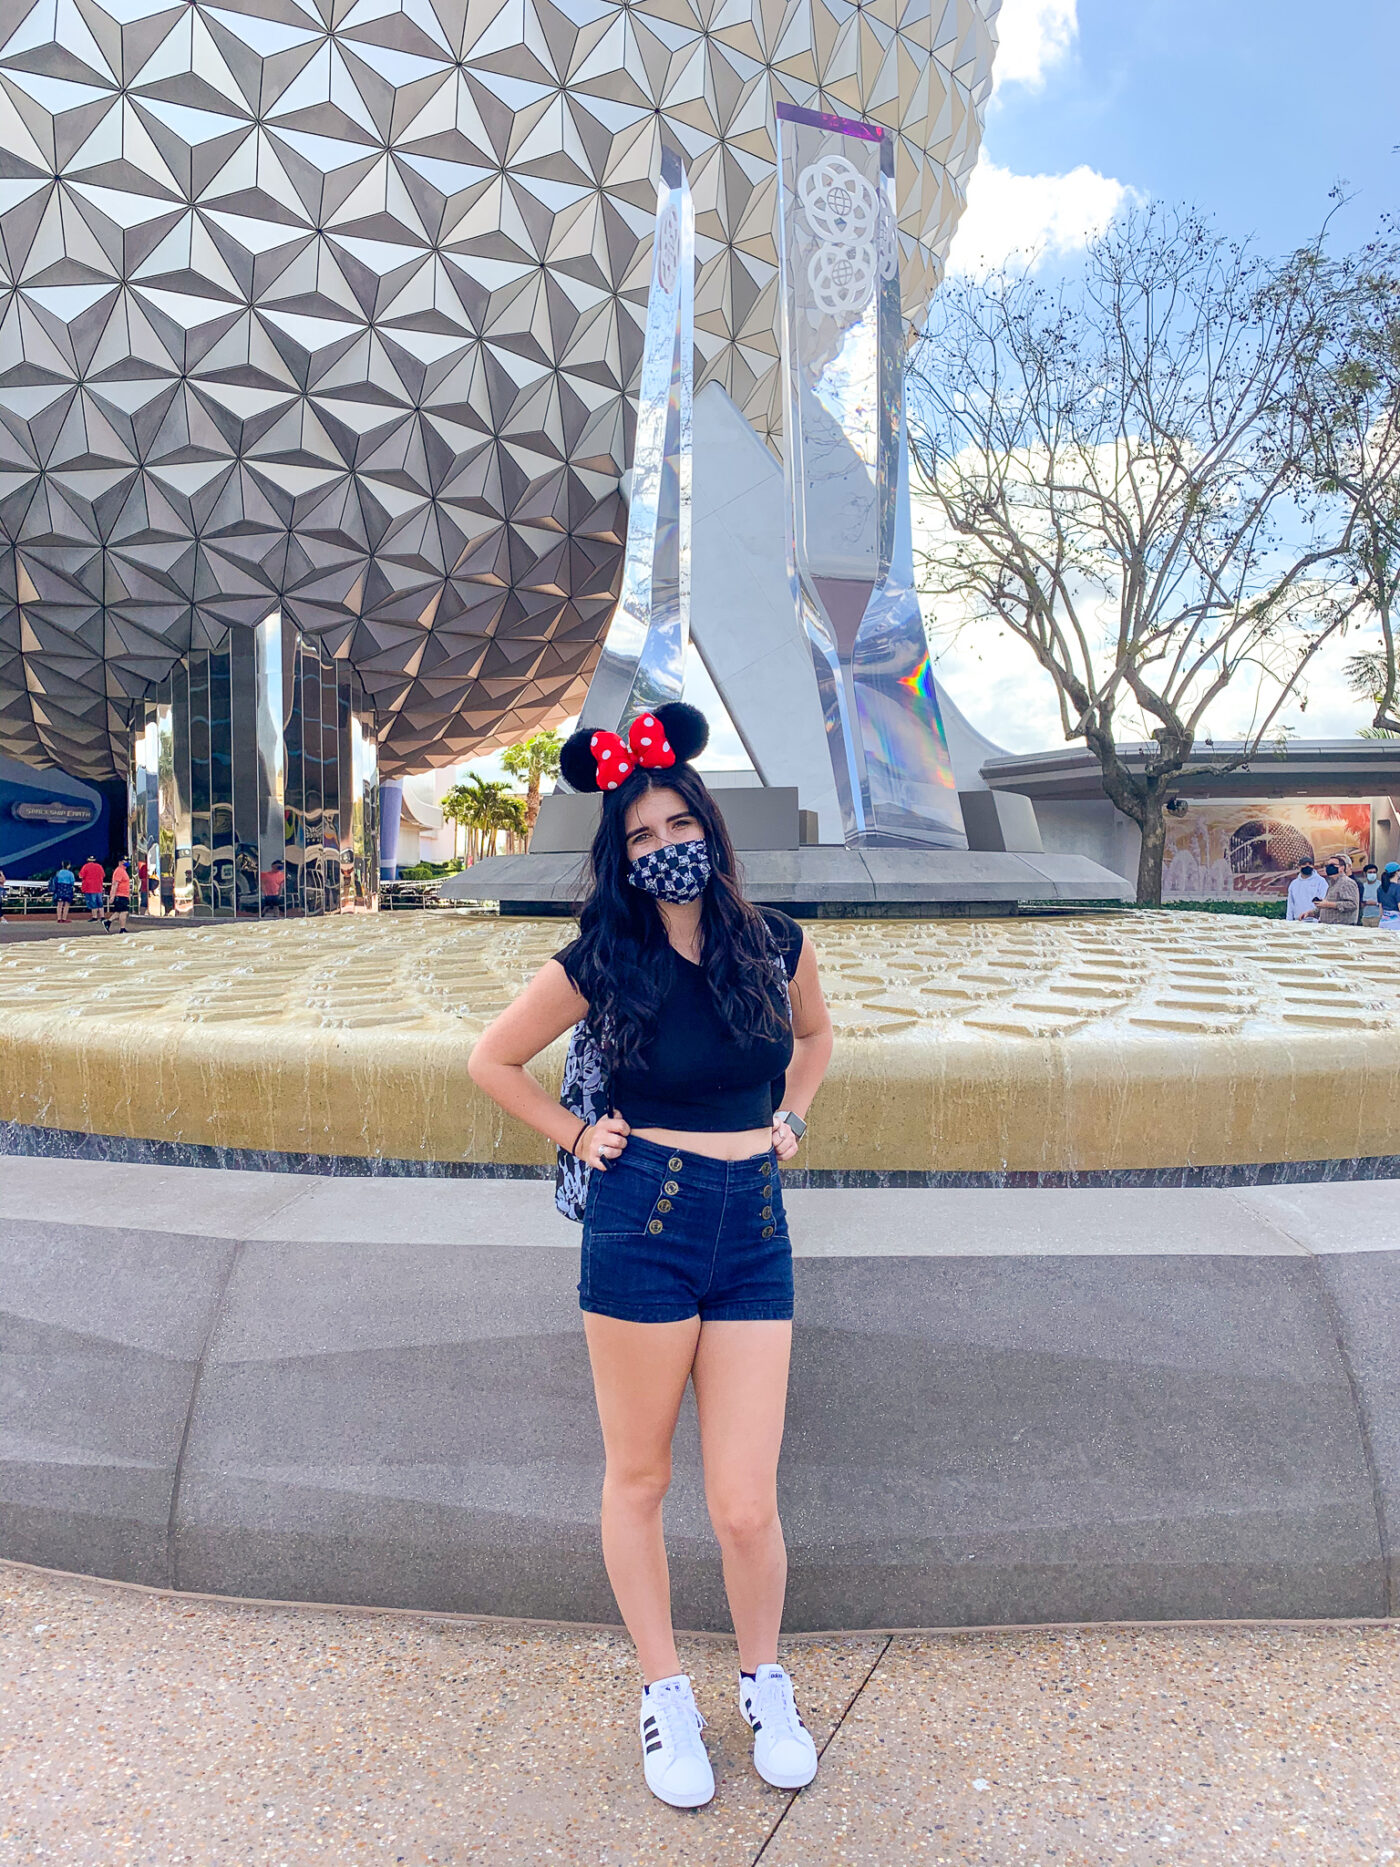 A Day in the Life: Epcot Edition